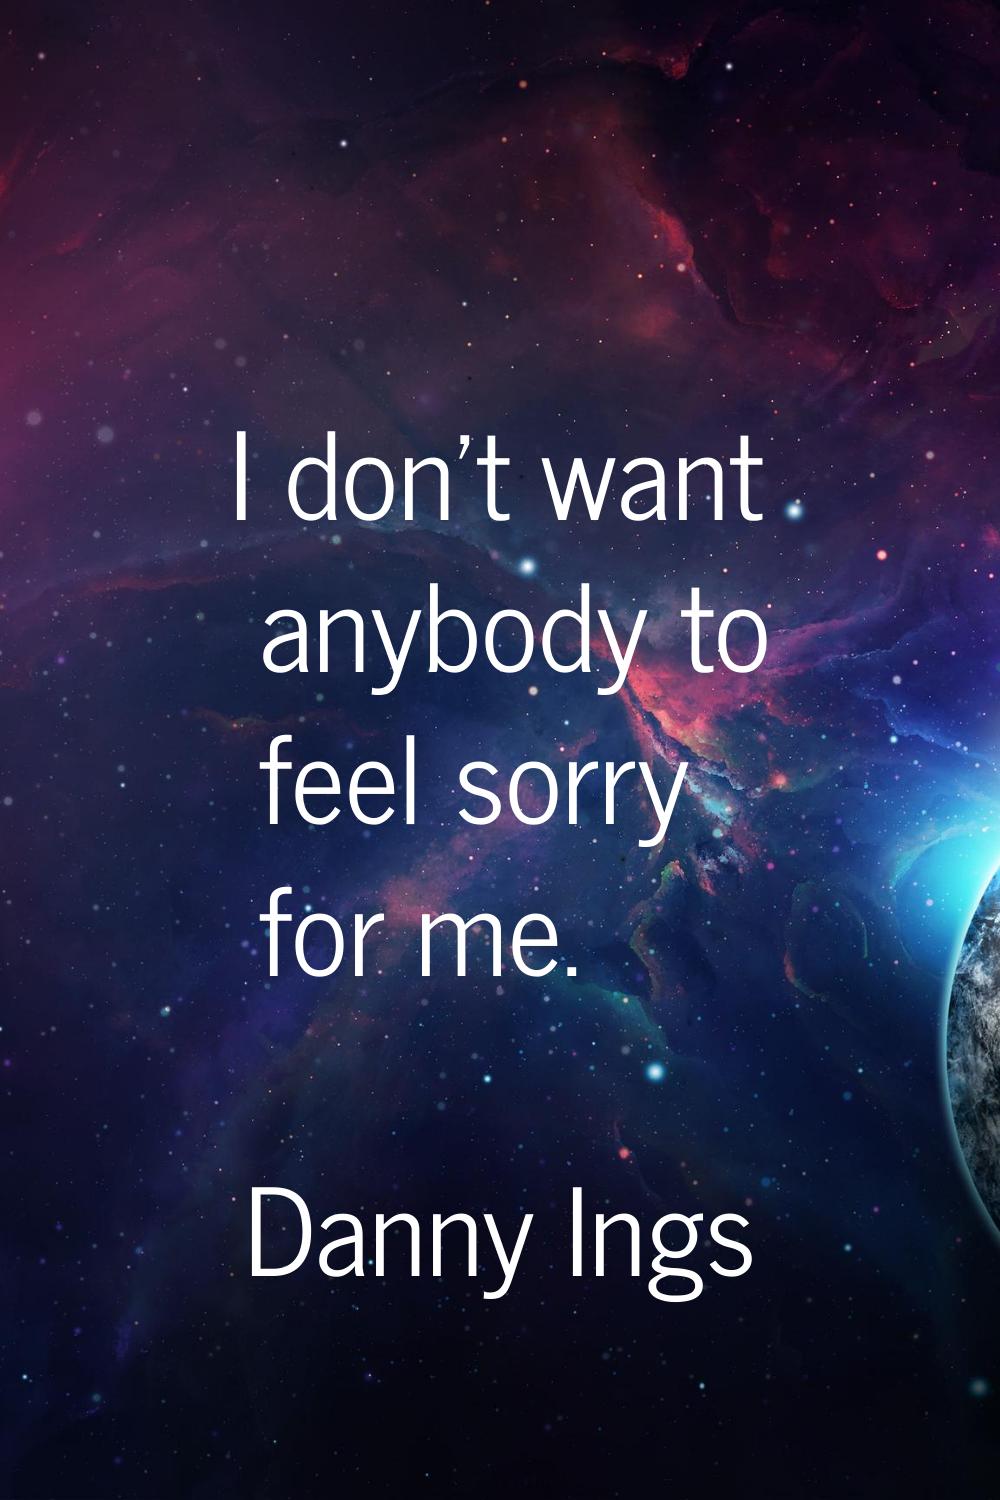 I don't want anybody to feel sorry for me.